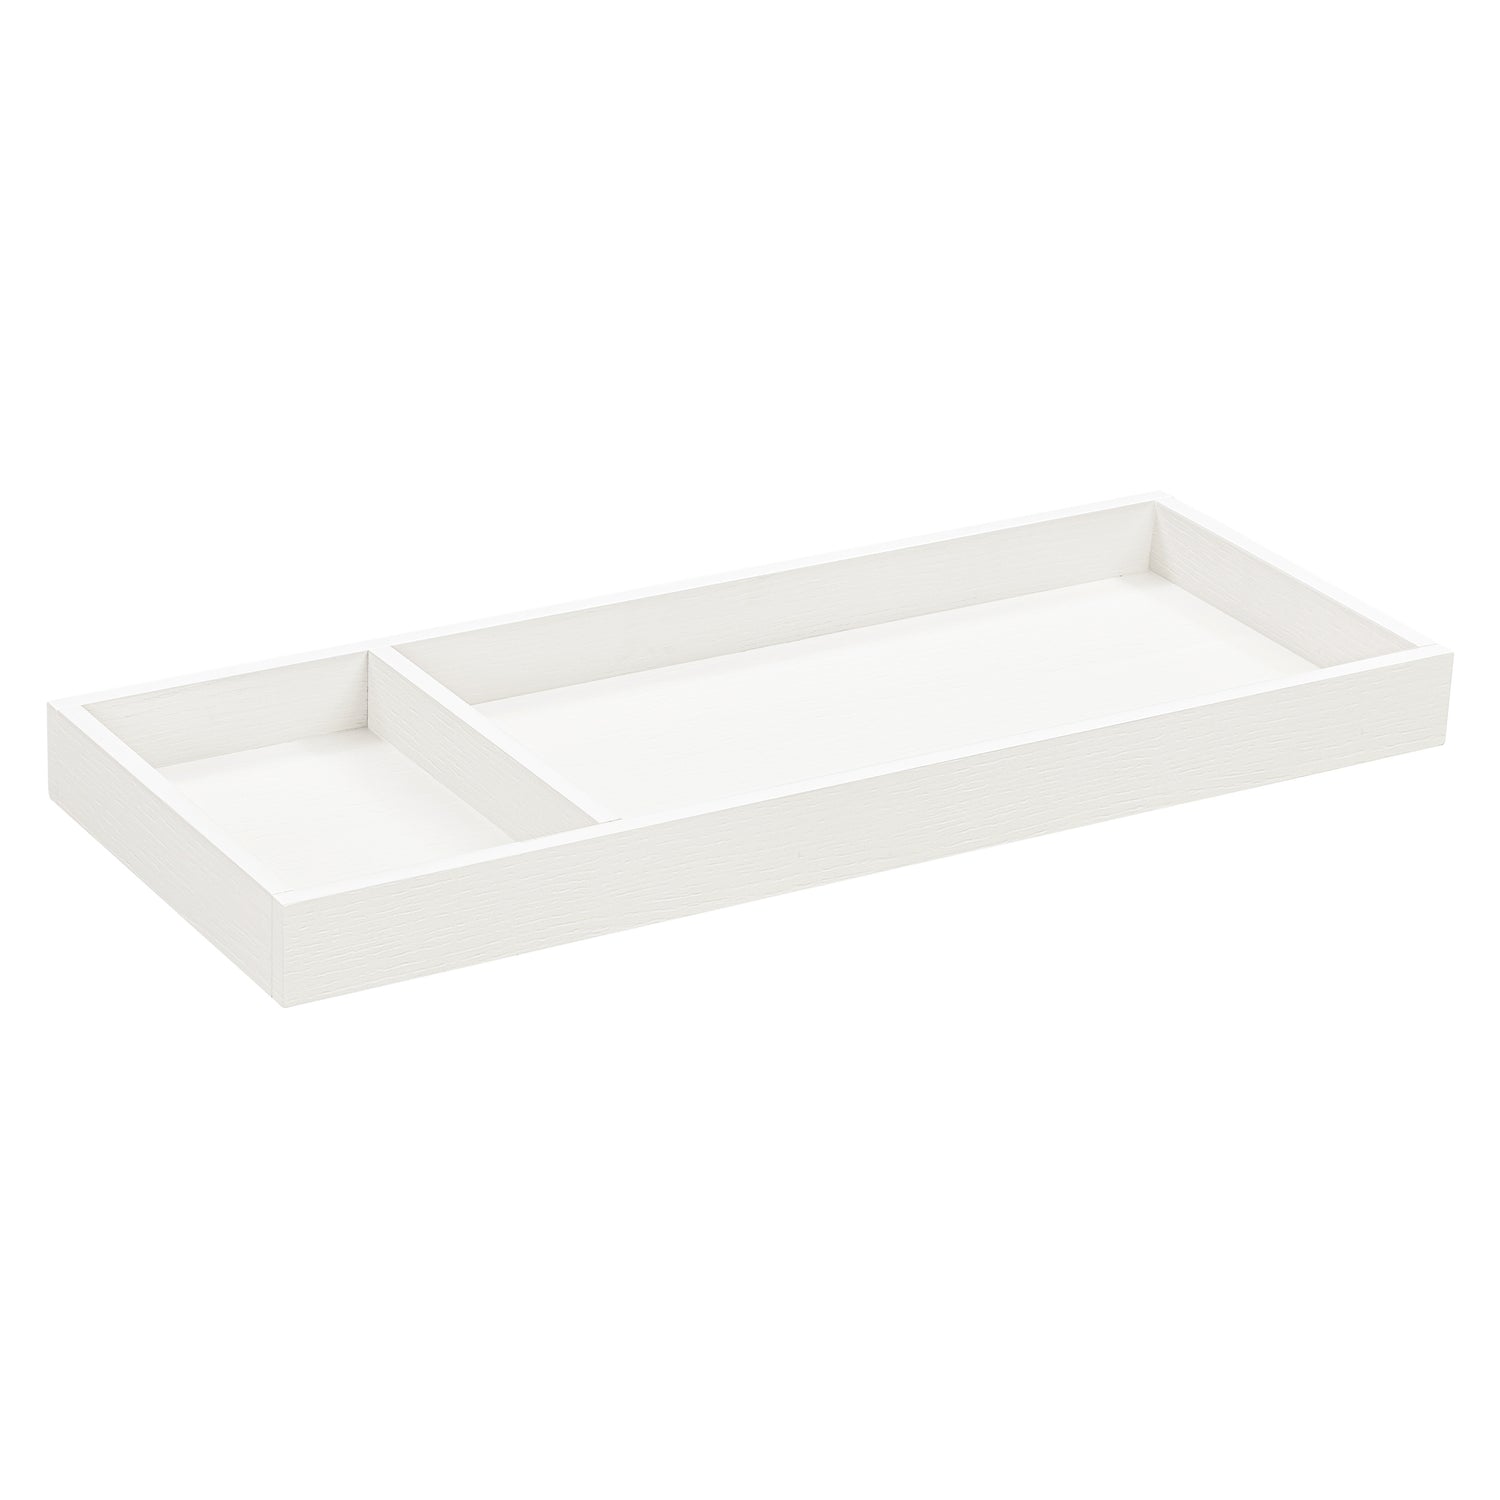 M0619HW,Universal Wide Removable Changing Tray in Heirloom White